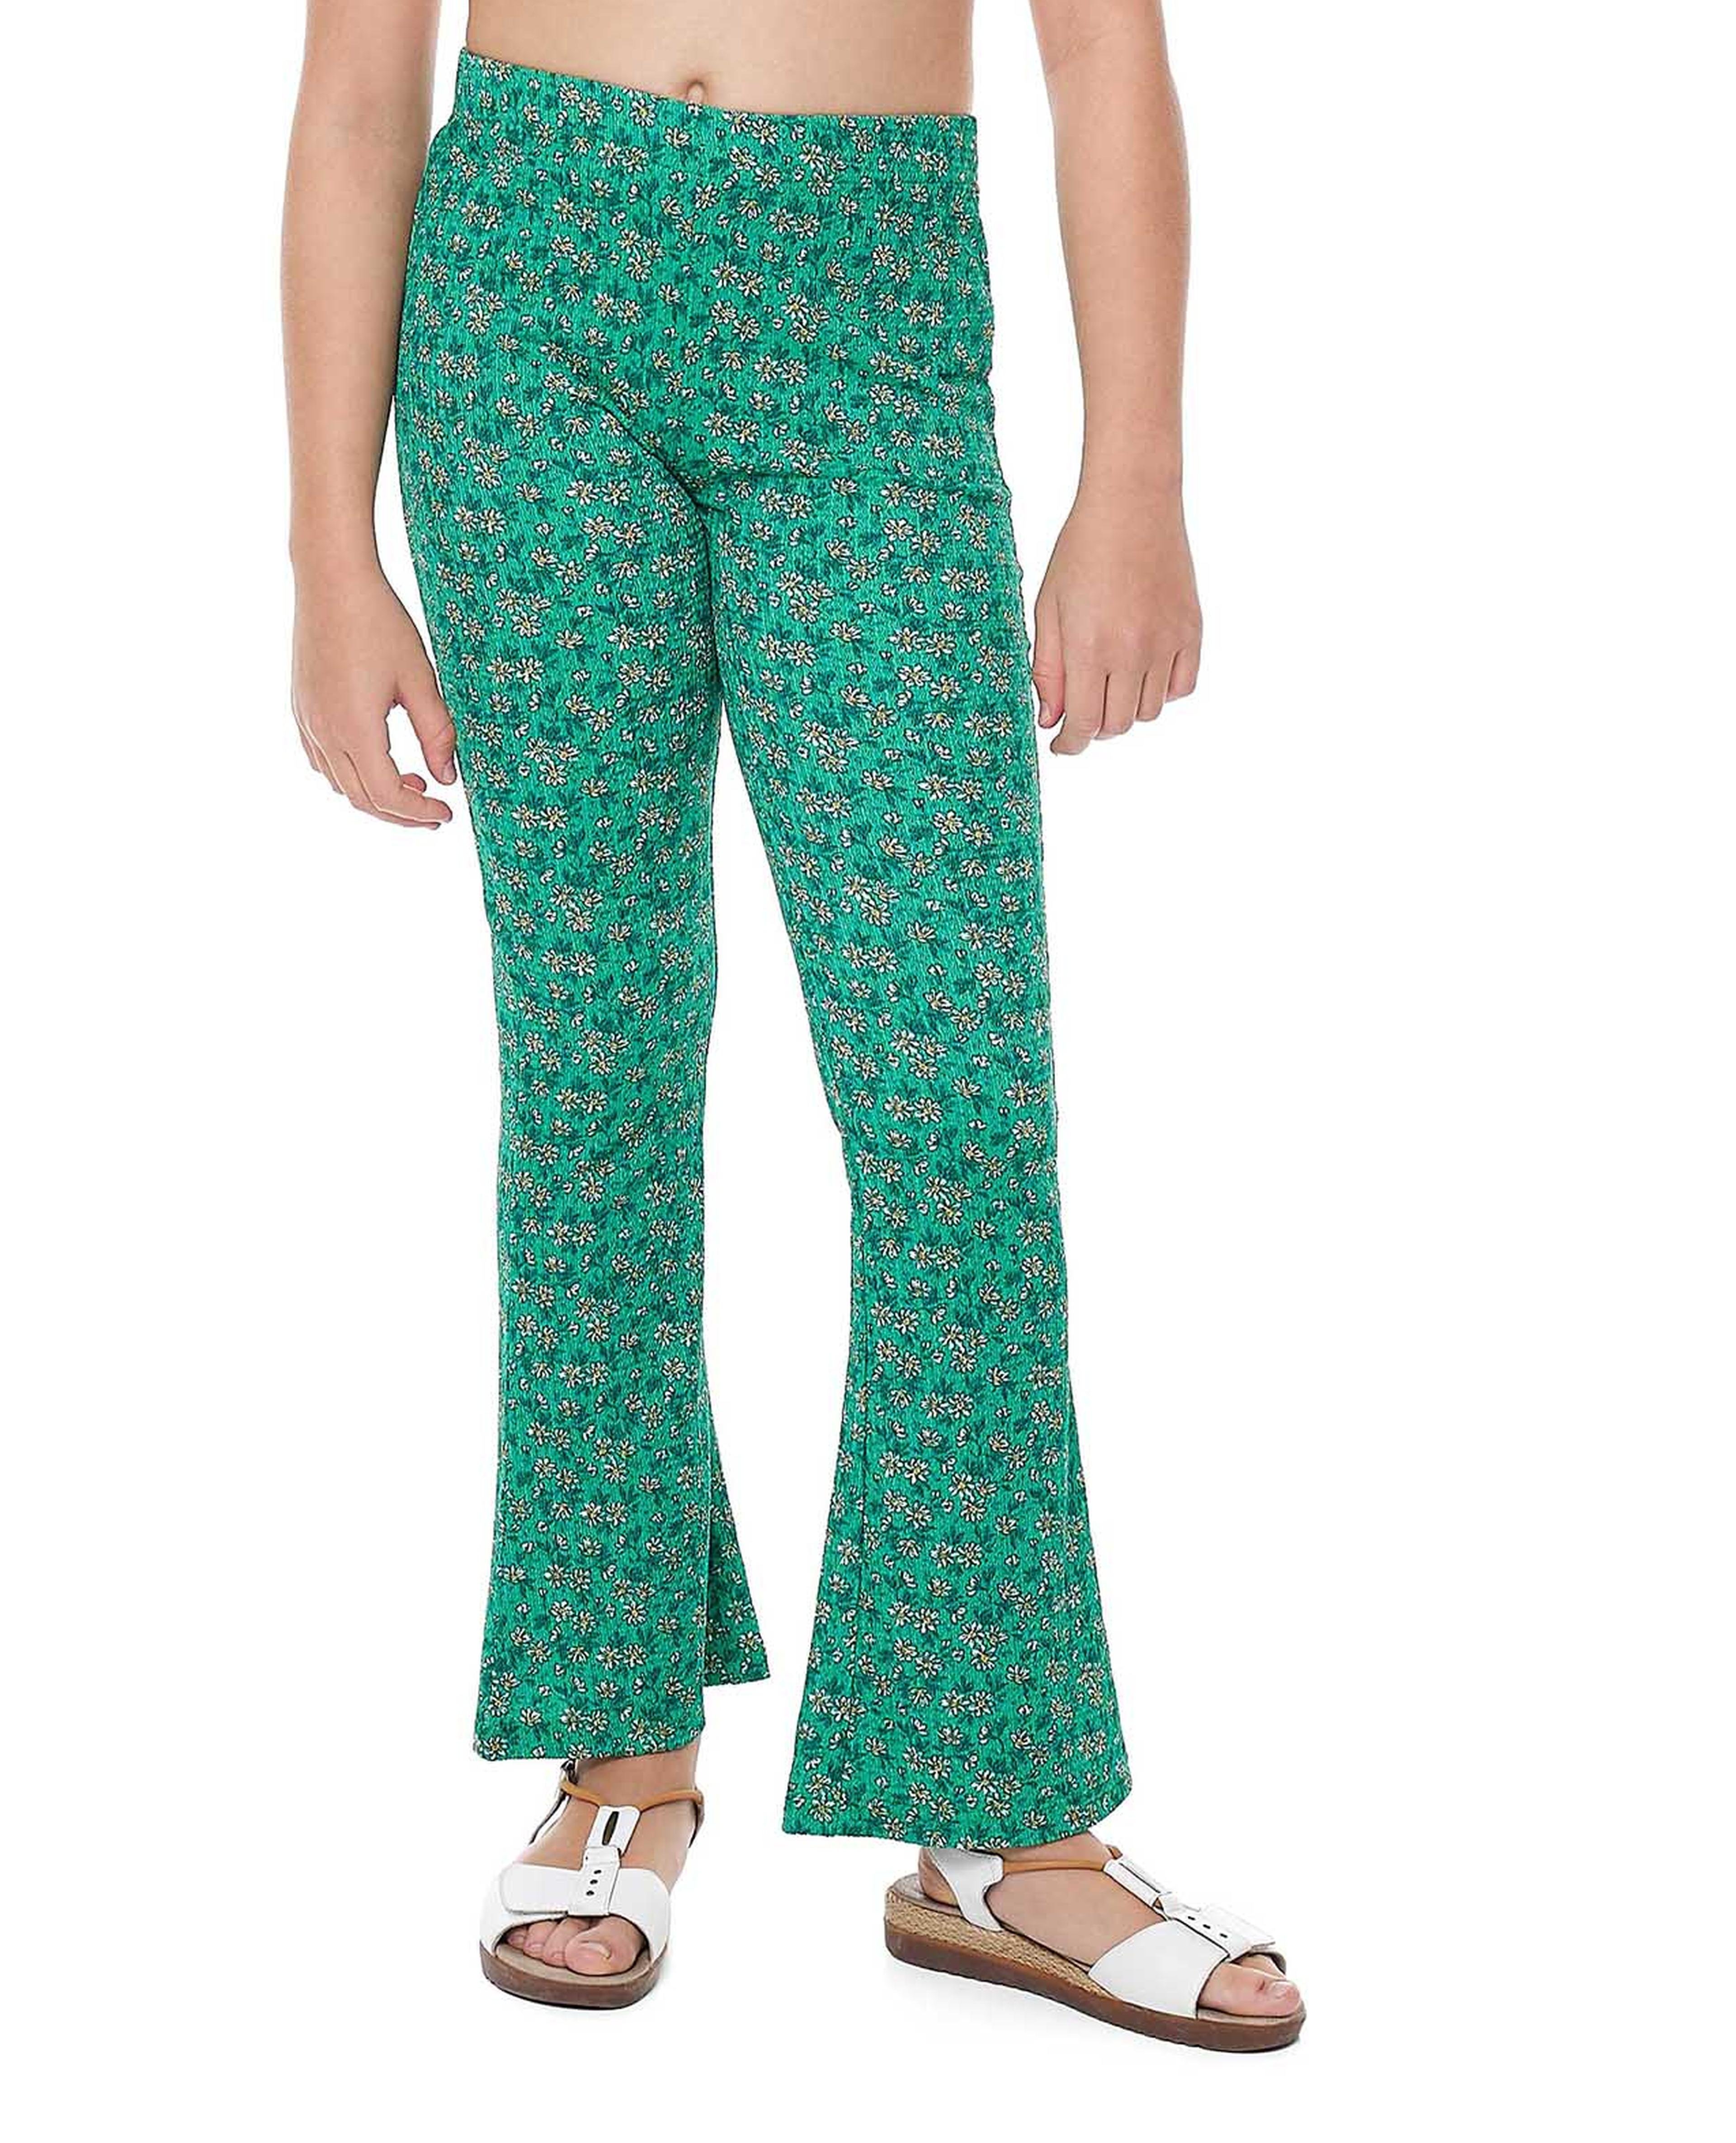 All Over Print Bootcut Pants with Elastic Waist